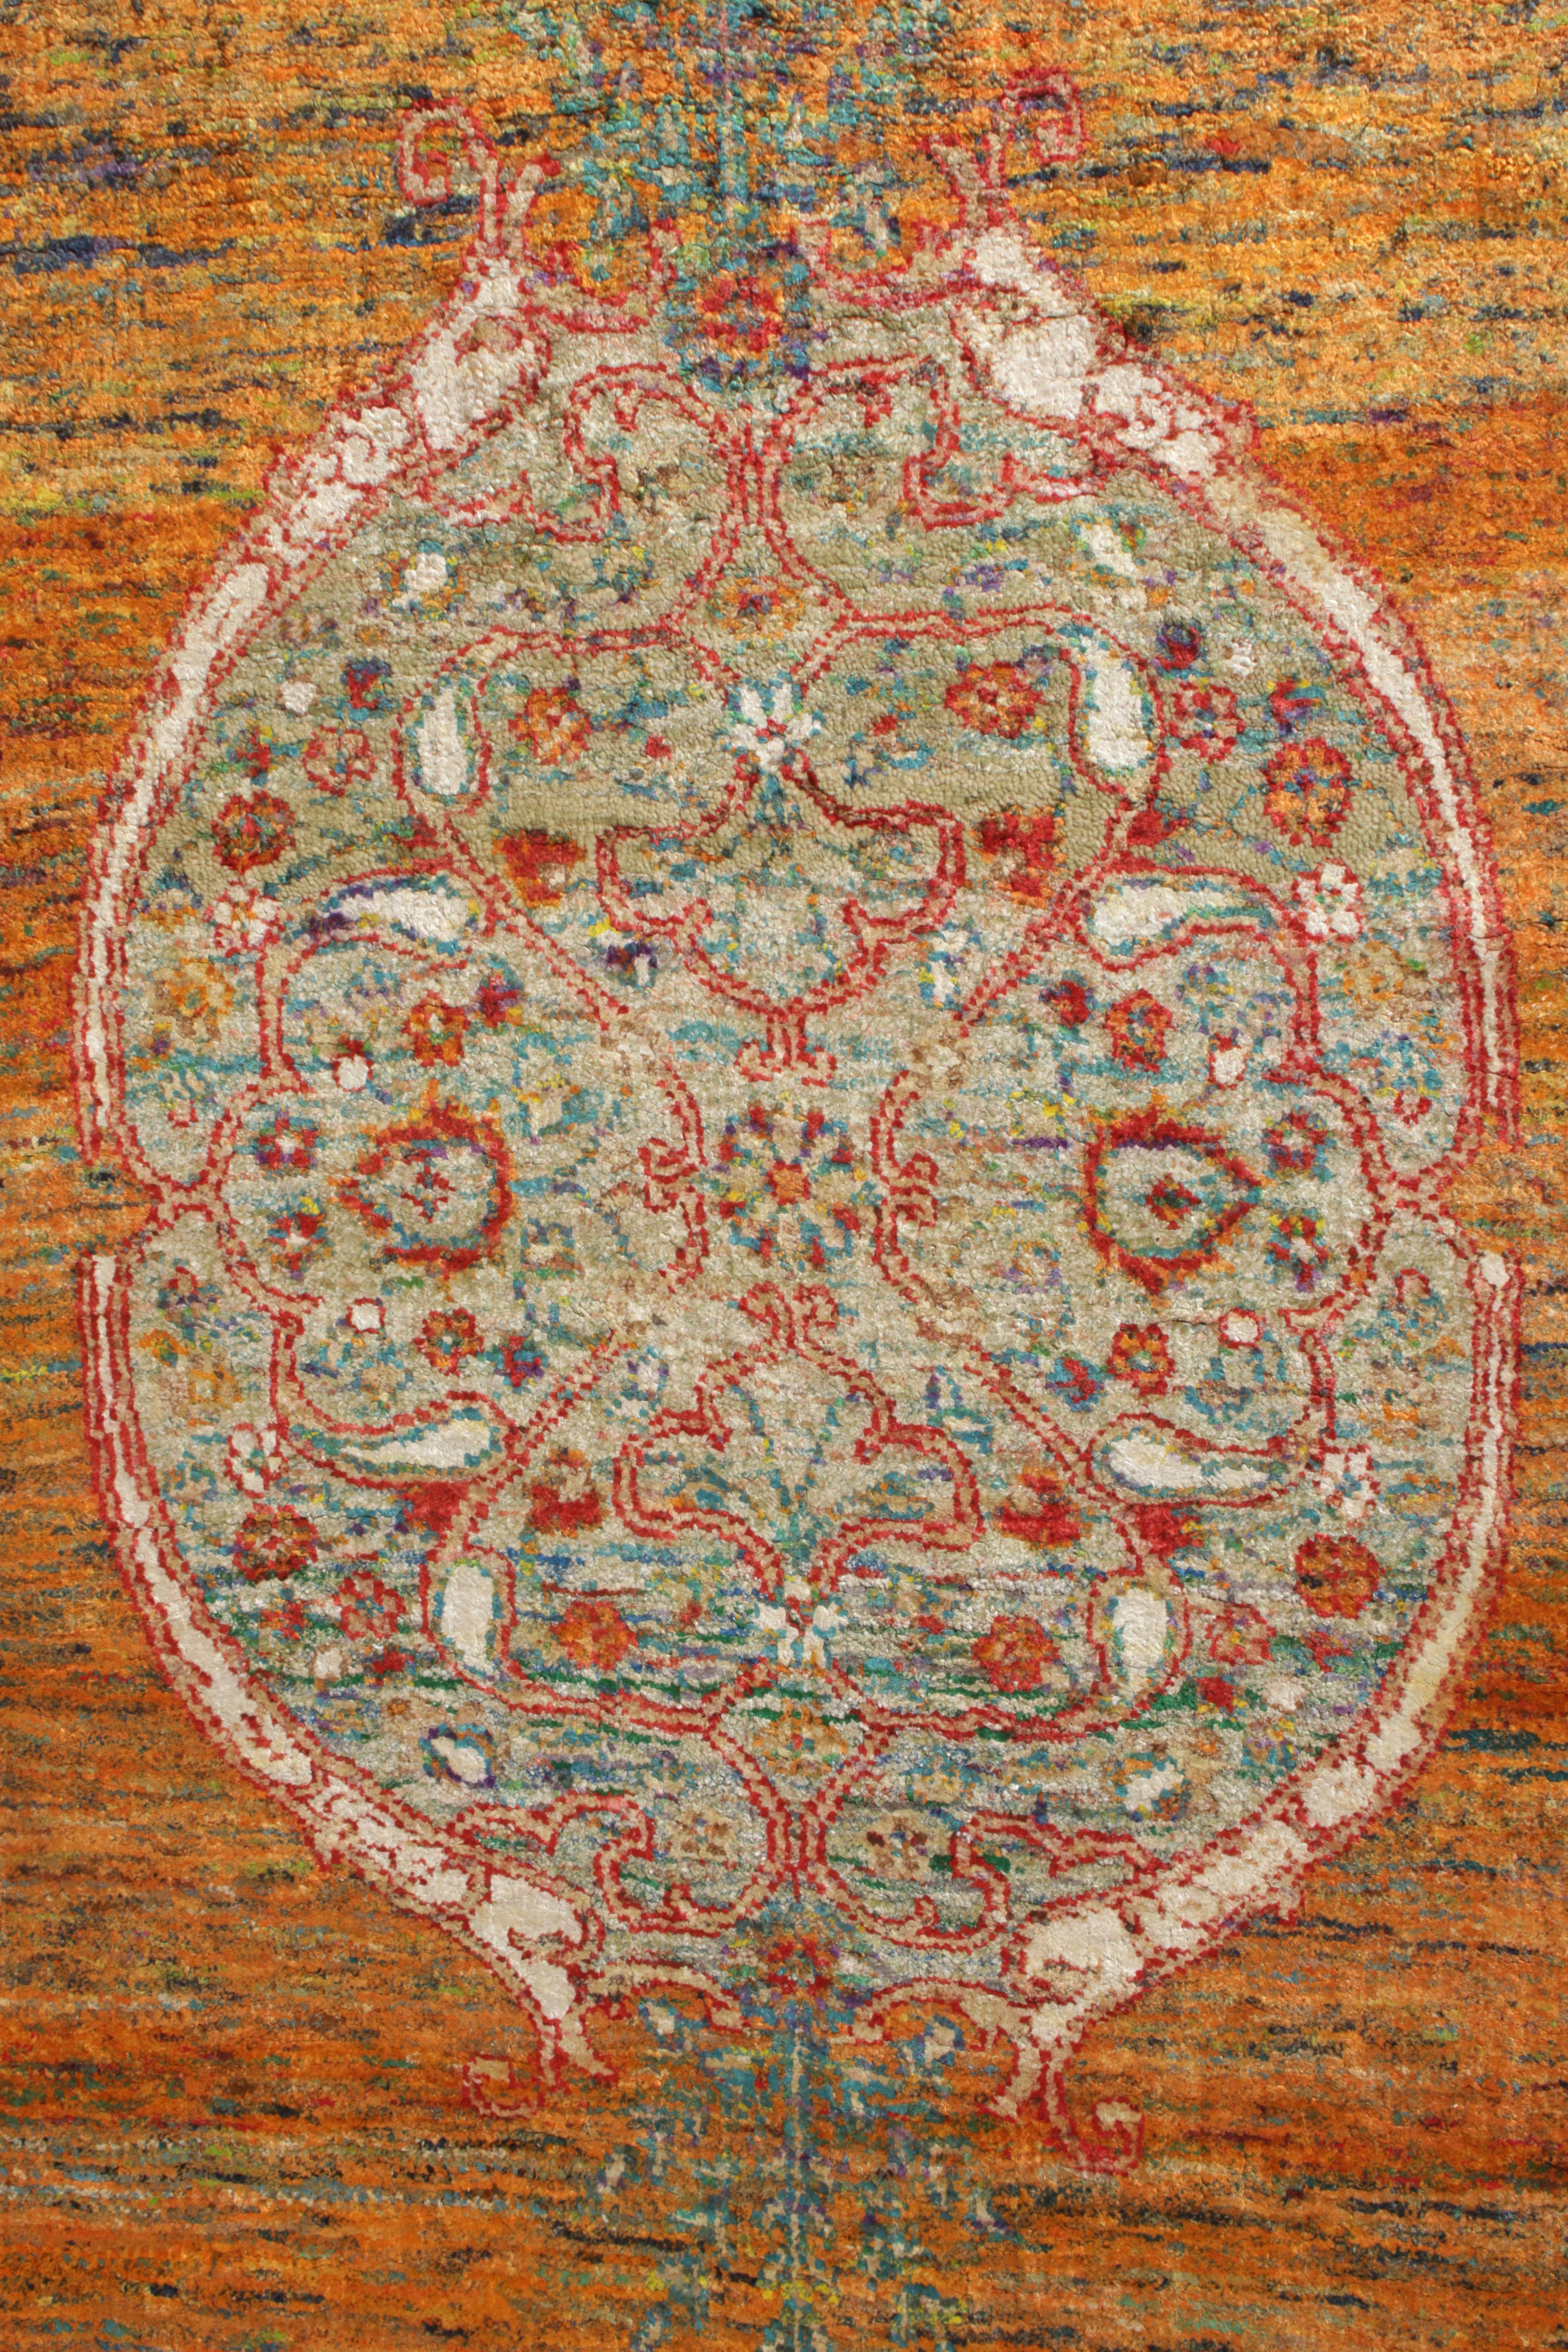 Rug & Kilim’s Classic Agra Style Rug in Orange-Red, Blue Medallion Pattern In New Condition For Sale In Long Island City, NY